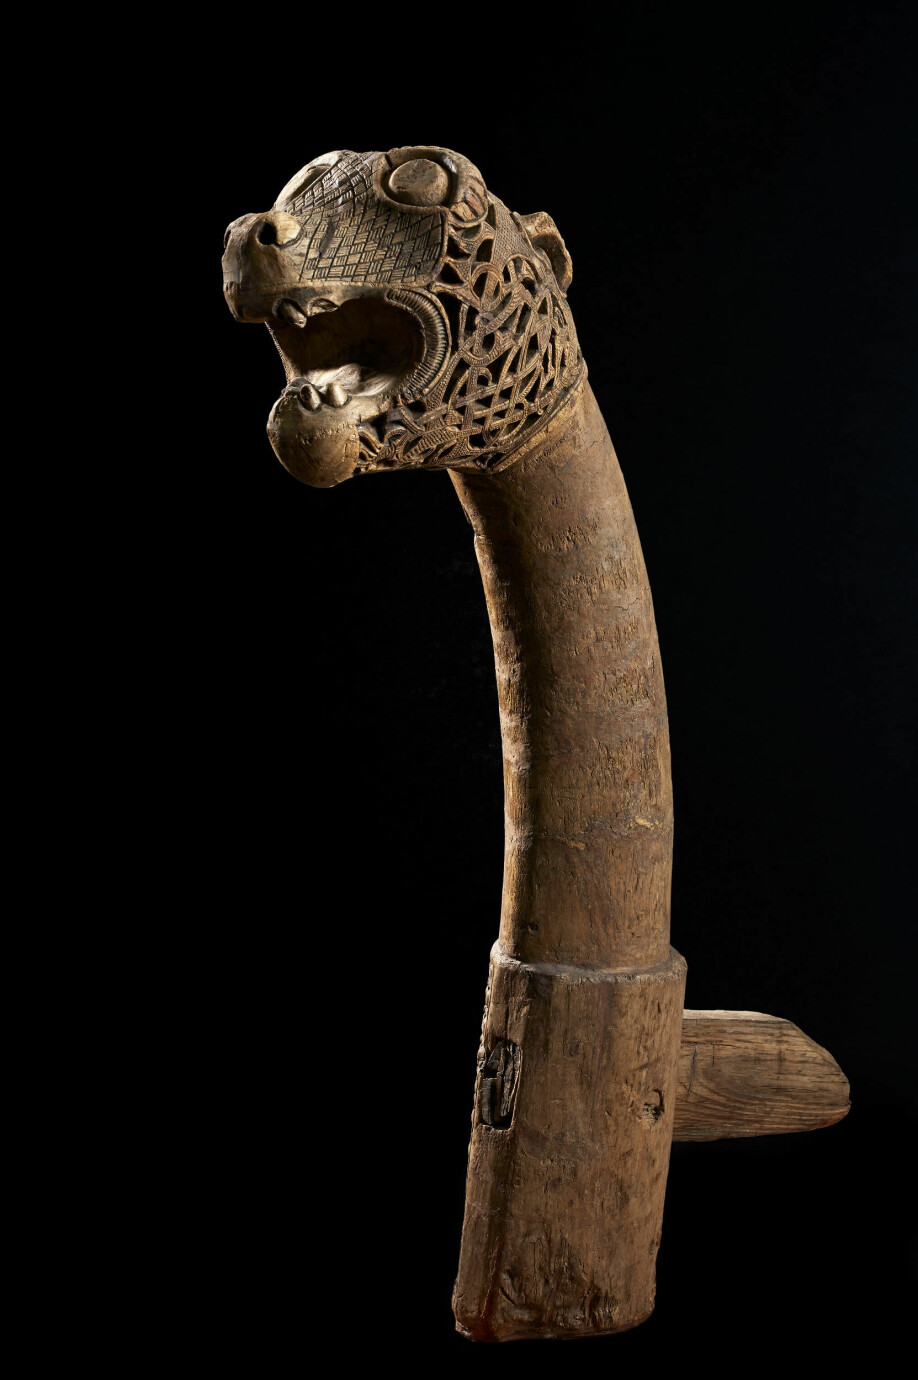 This is what the serpent head from the Oseberg ship looks like.